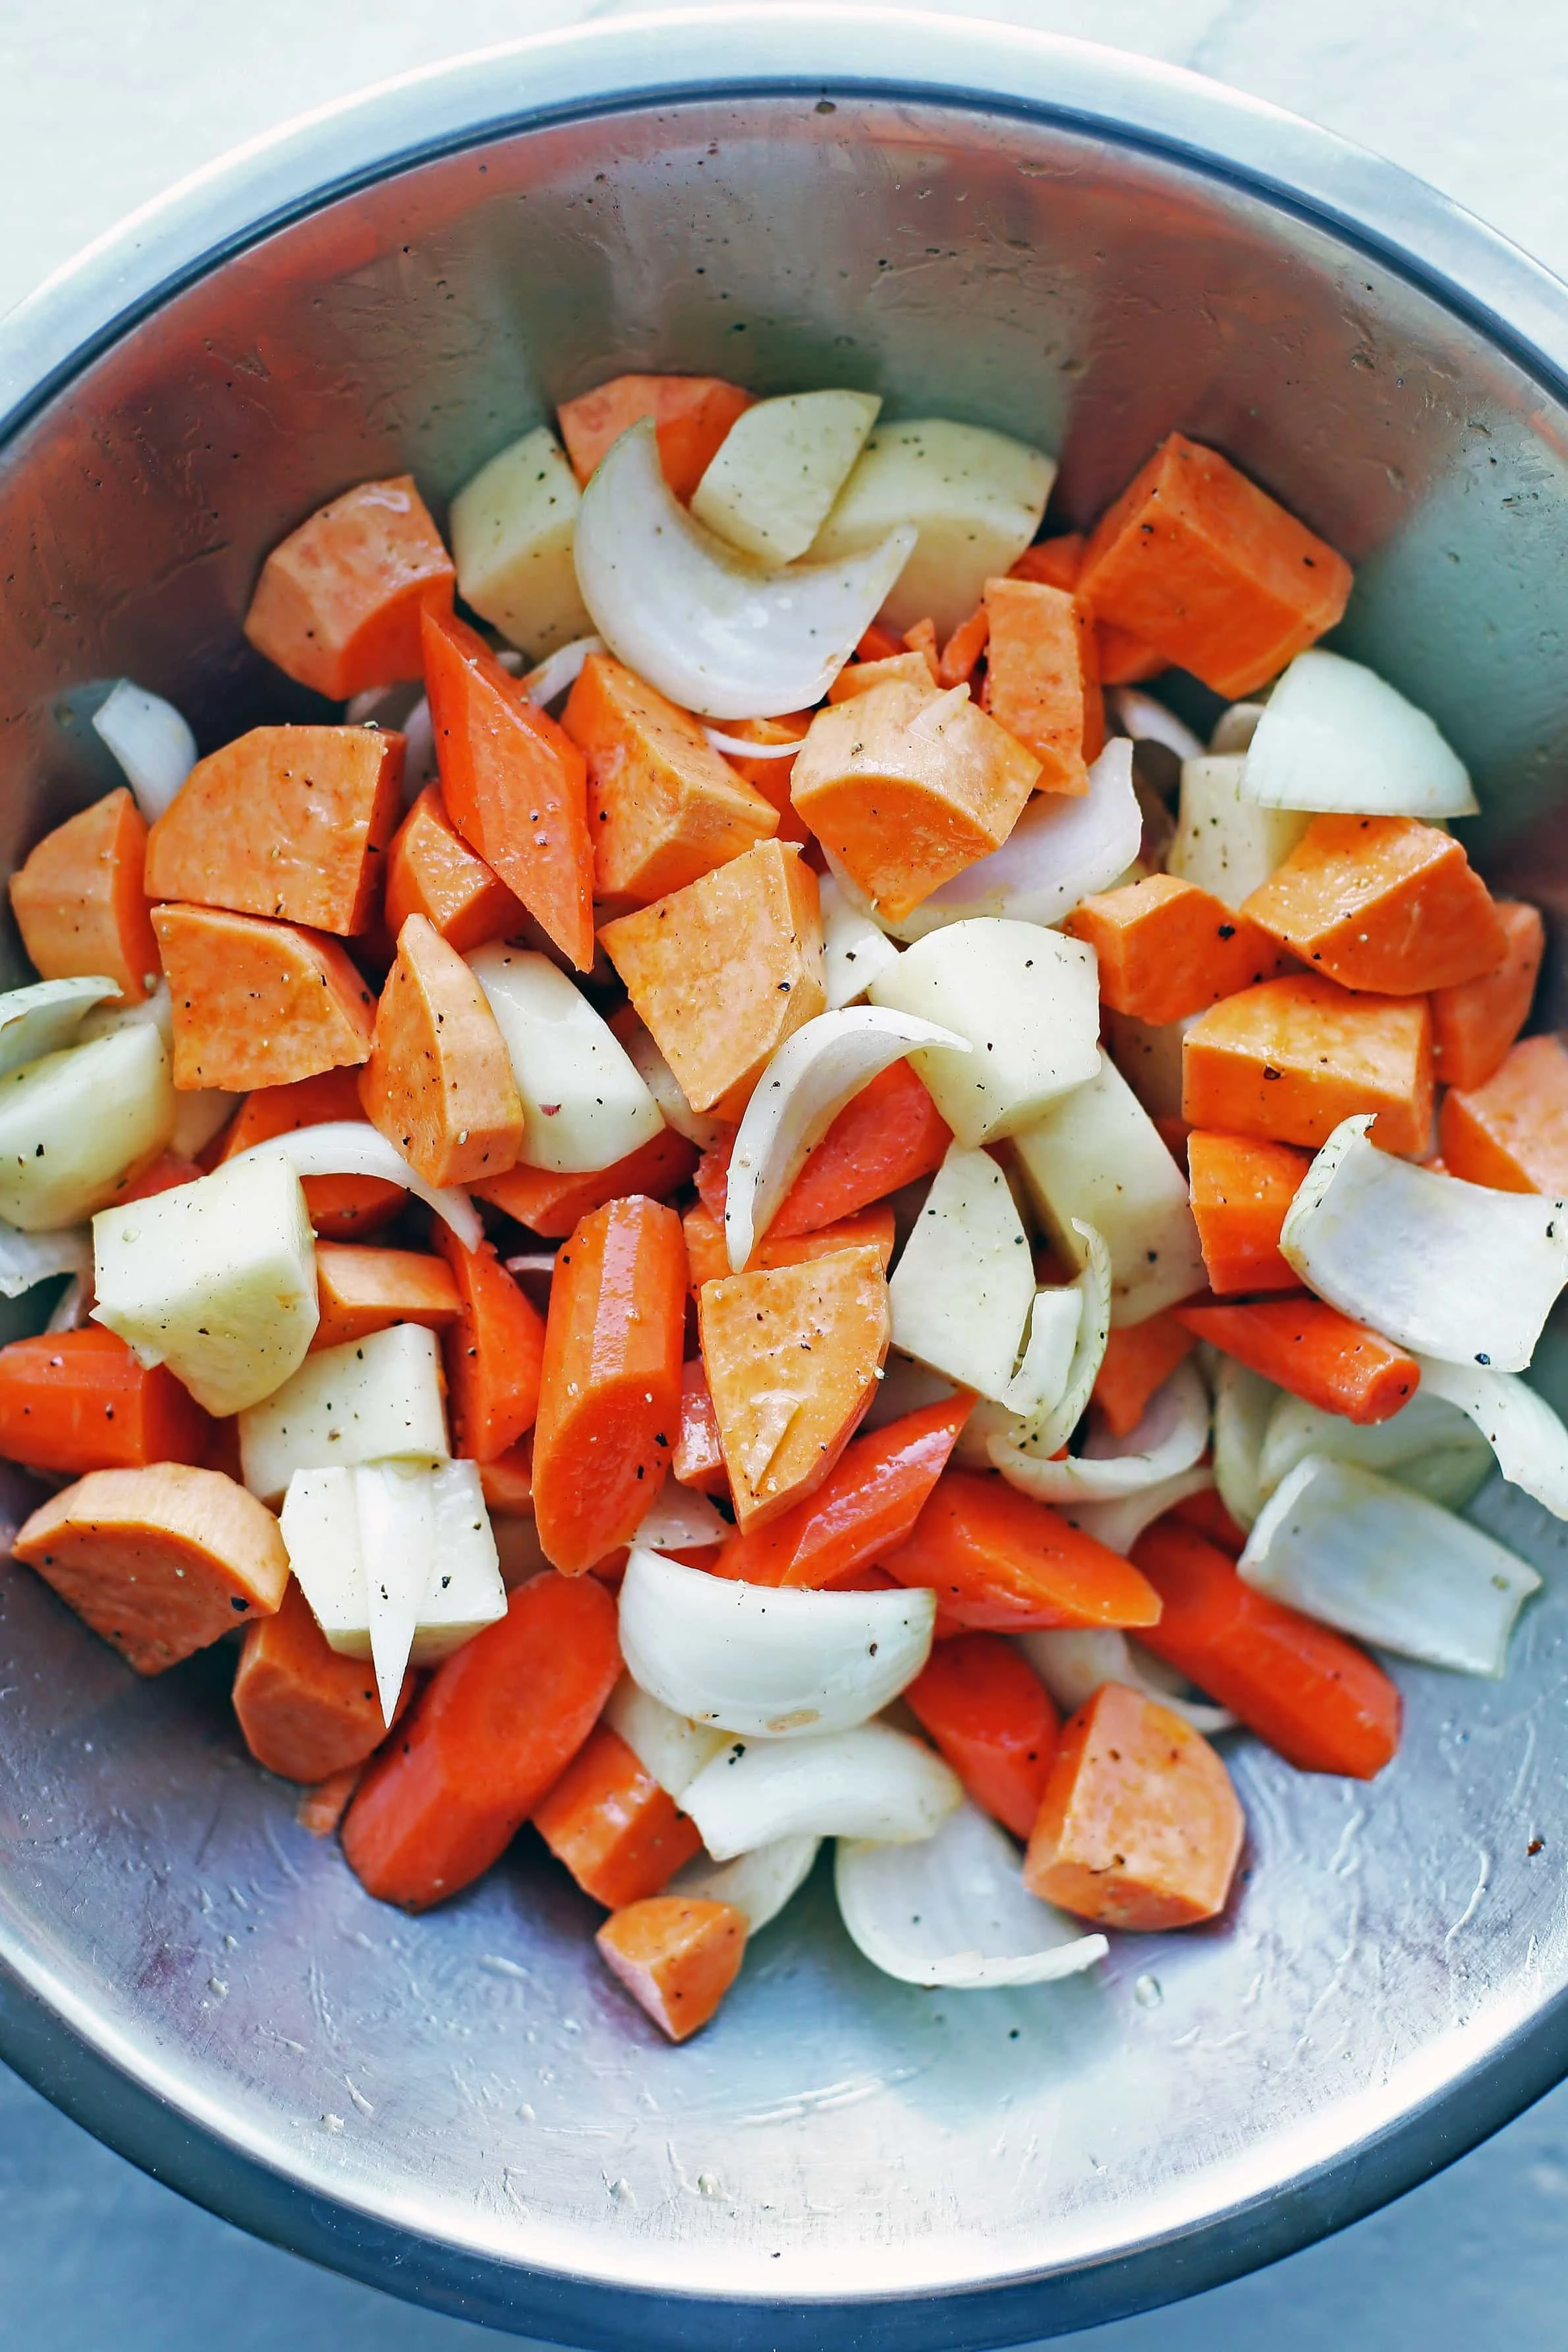 Chopped carrots, potatoes, sweet potatoes, and onions in a large stainless steel bowl.